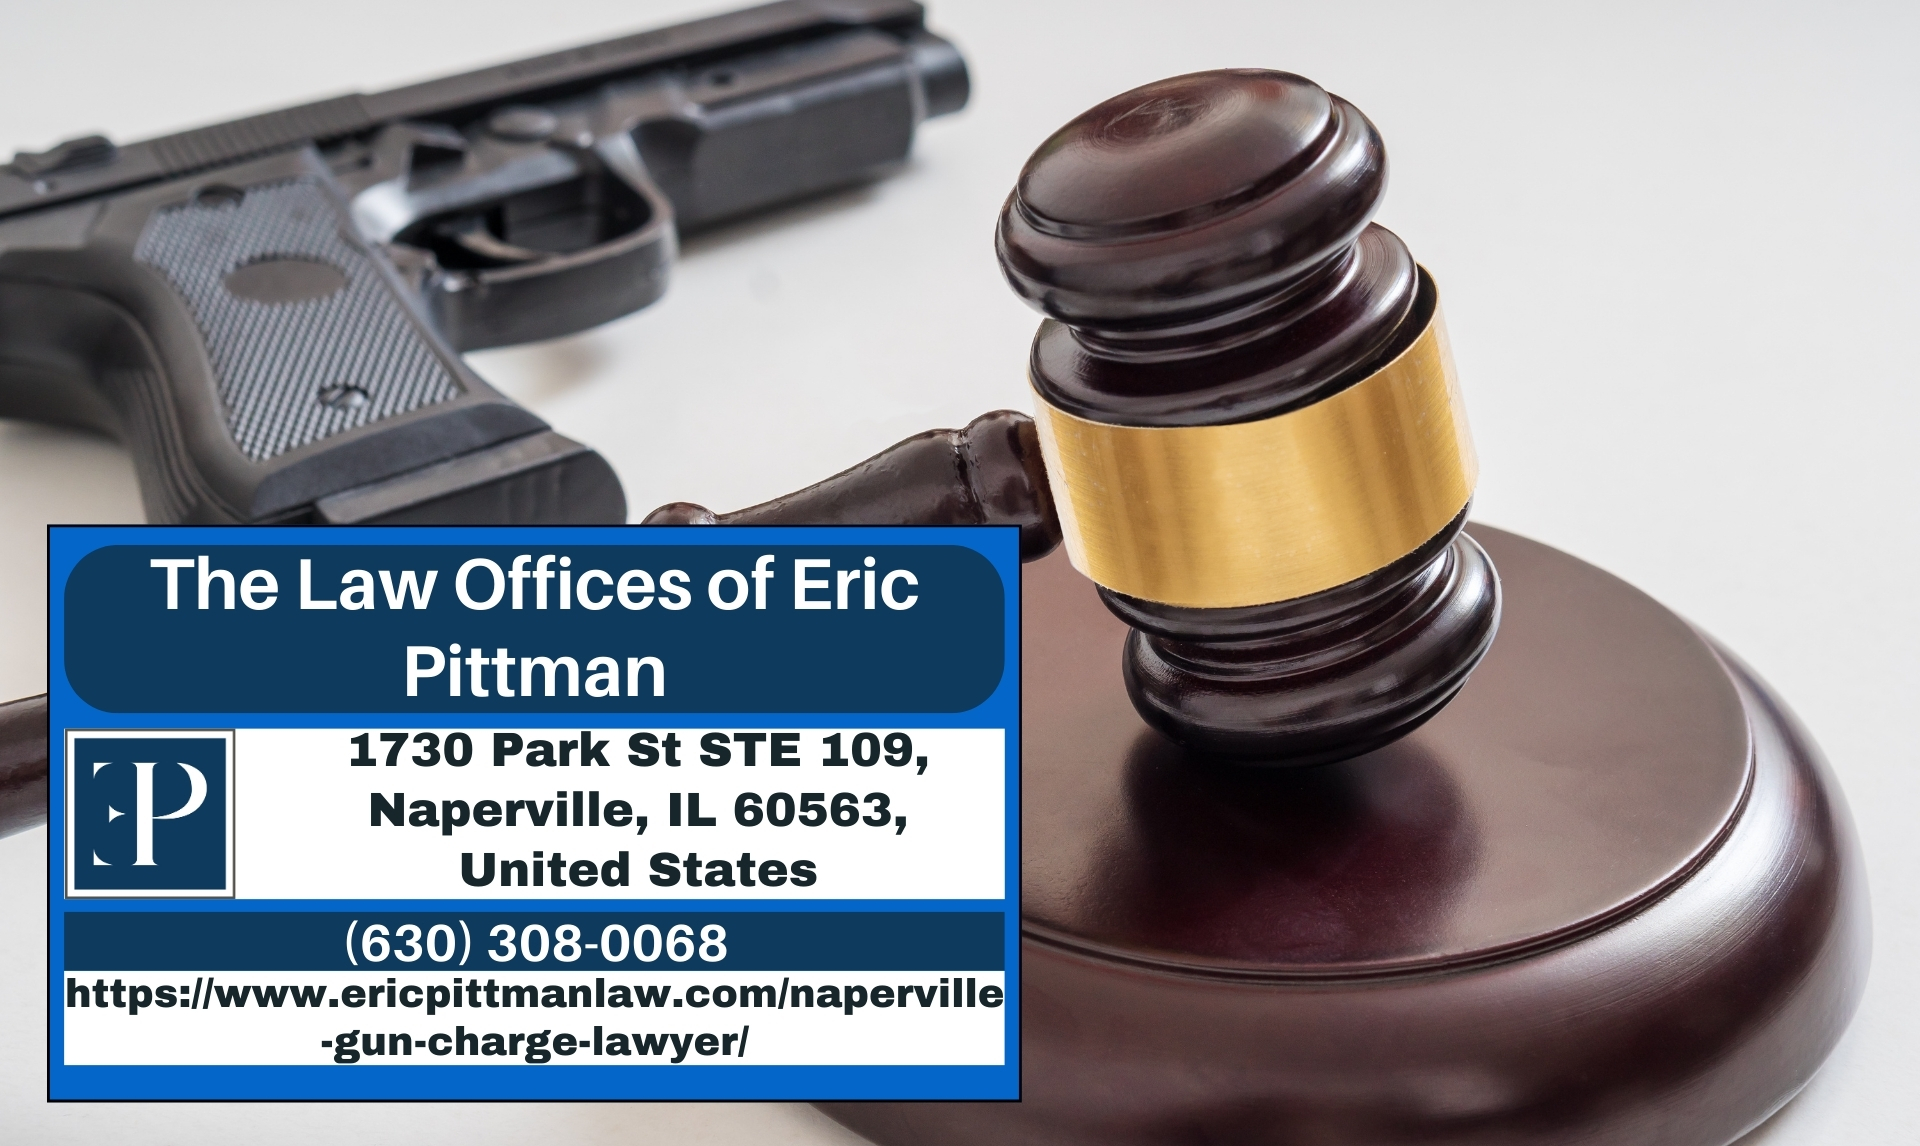 Naperville Gun Charge Lawyer Eric Pittman Releases Insightful Article on Illinois Gun Laws